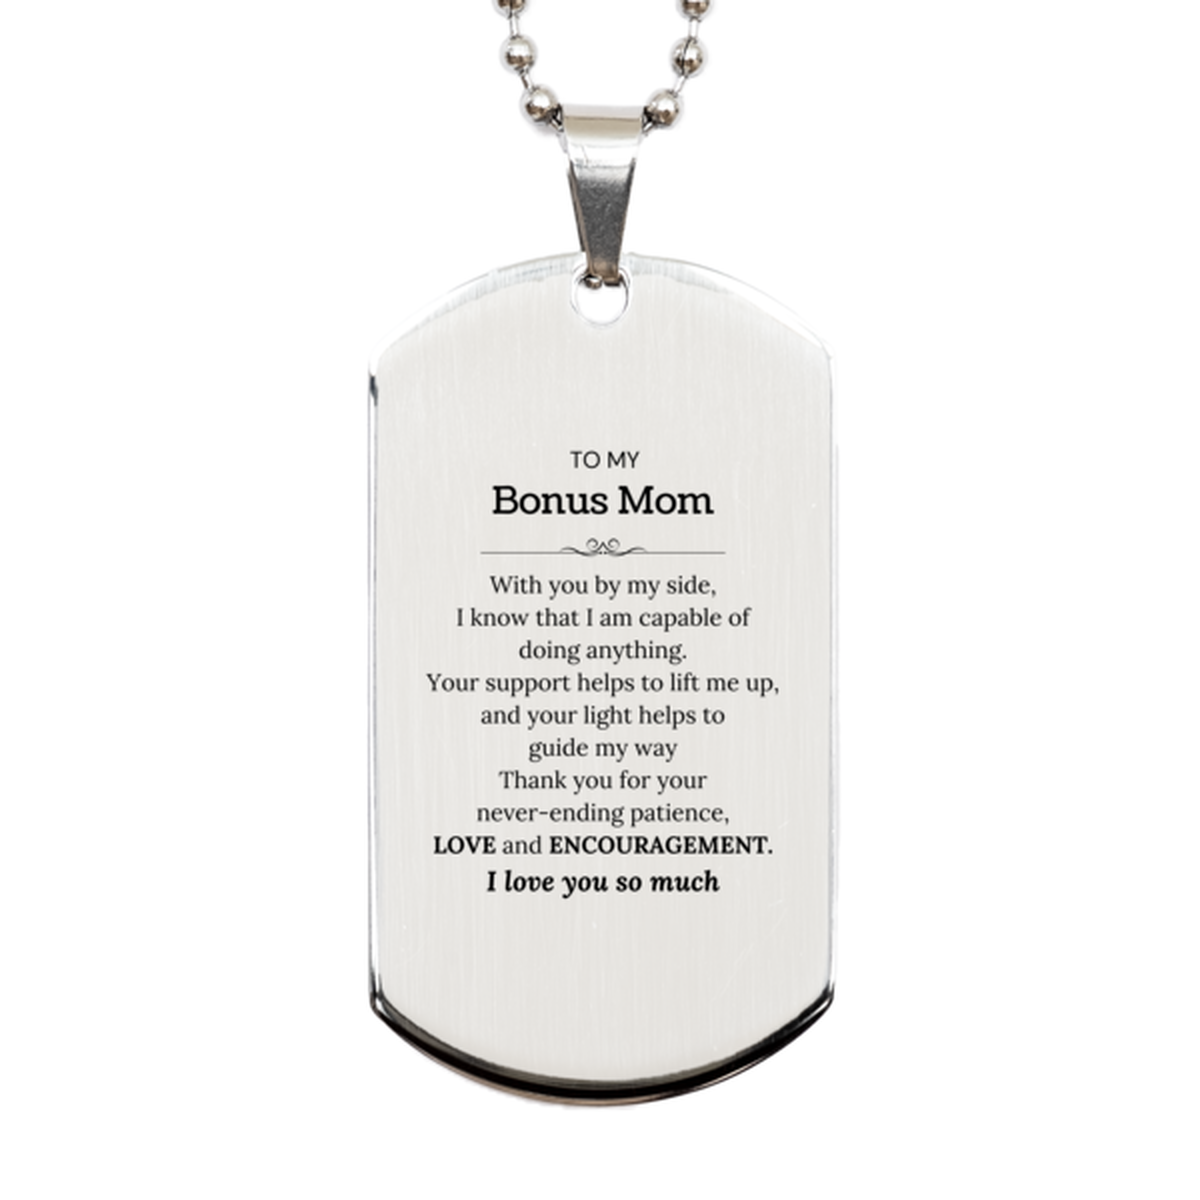 Appreciation Bonus Mom Silver Dog Tag Gifts, To My Bonus Mom Birthday Christmas Wedding Keepsake Gifts for Bonus Mom With you by my side, I know that I am capable of doing anything. I love you so much